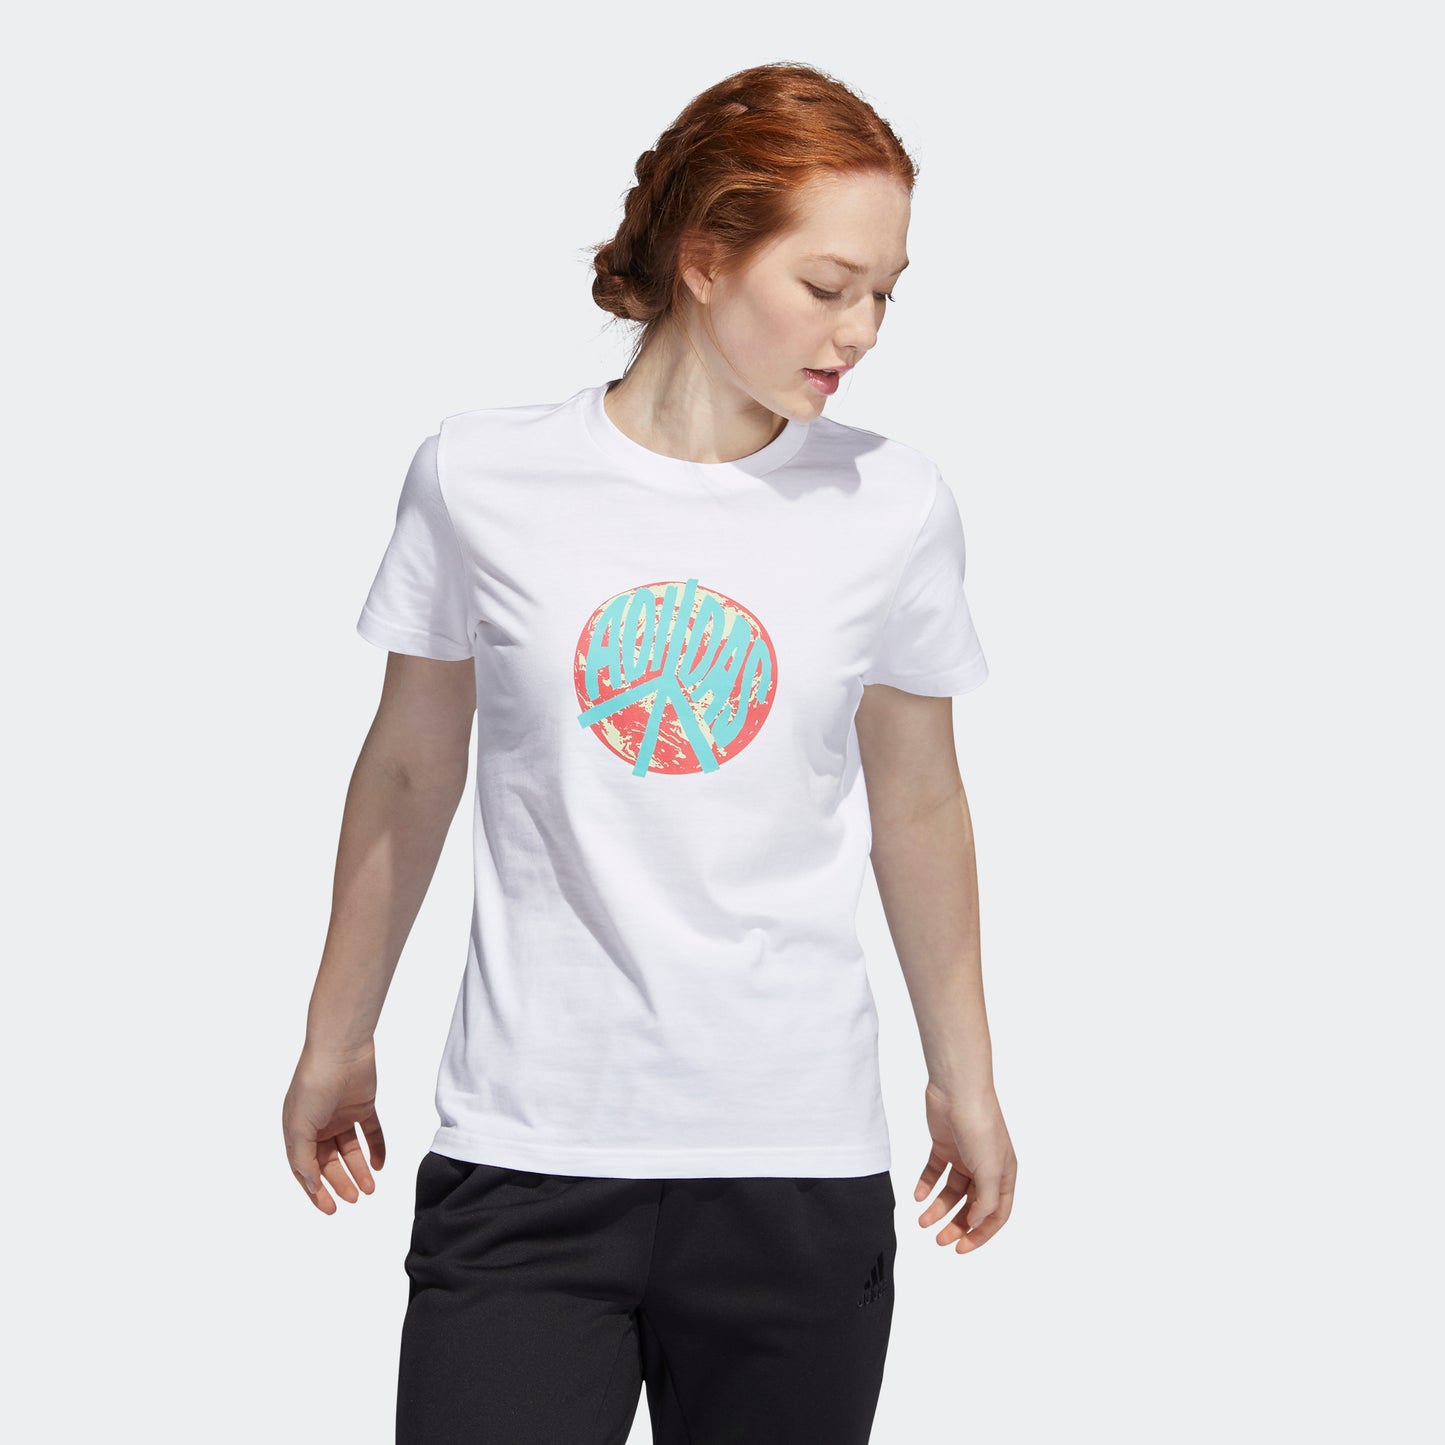 adidas EARTH DAY Graphic T-Shirt - White | Women's